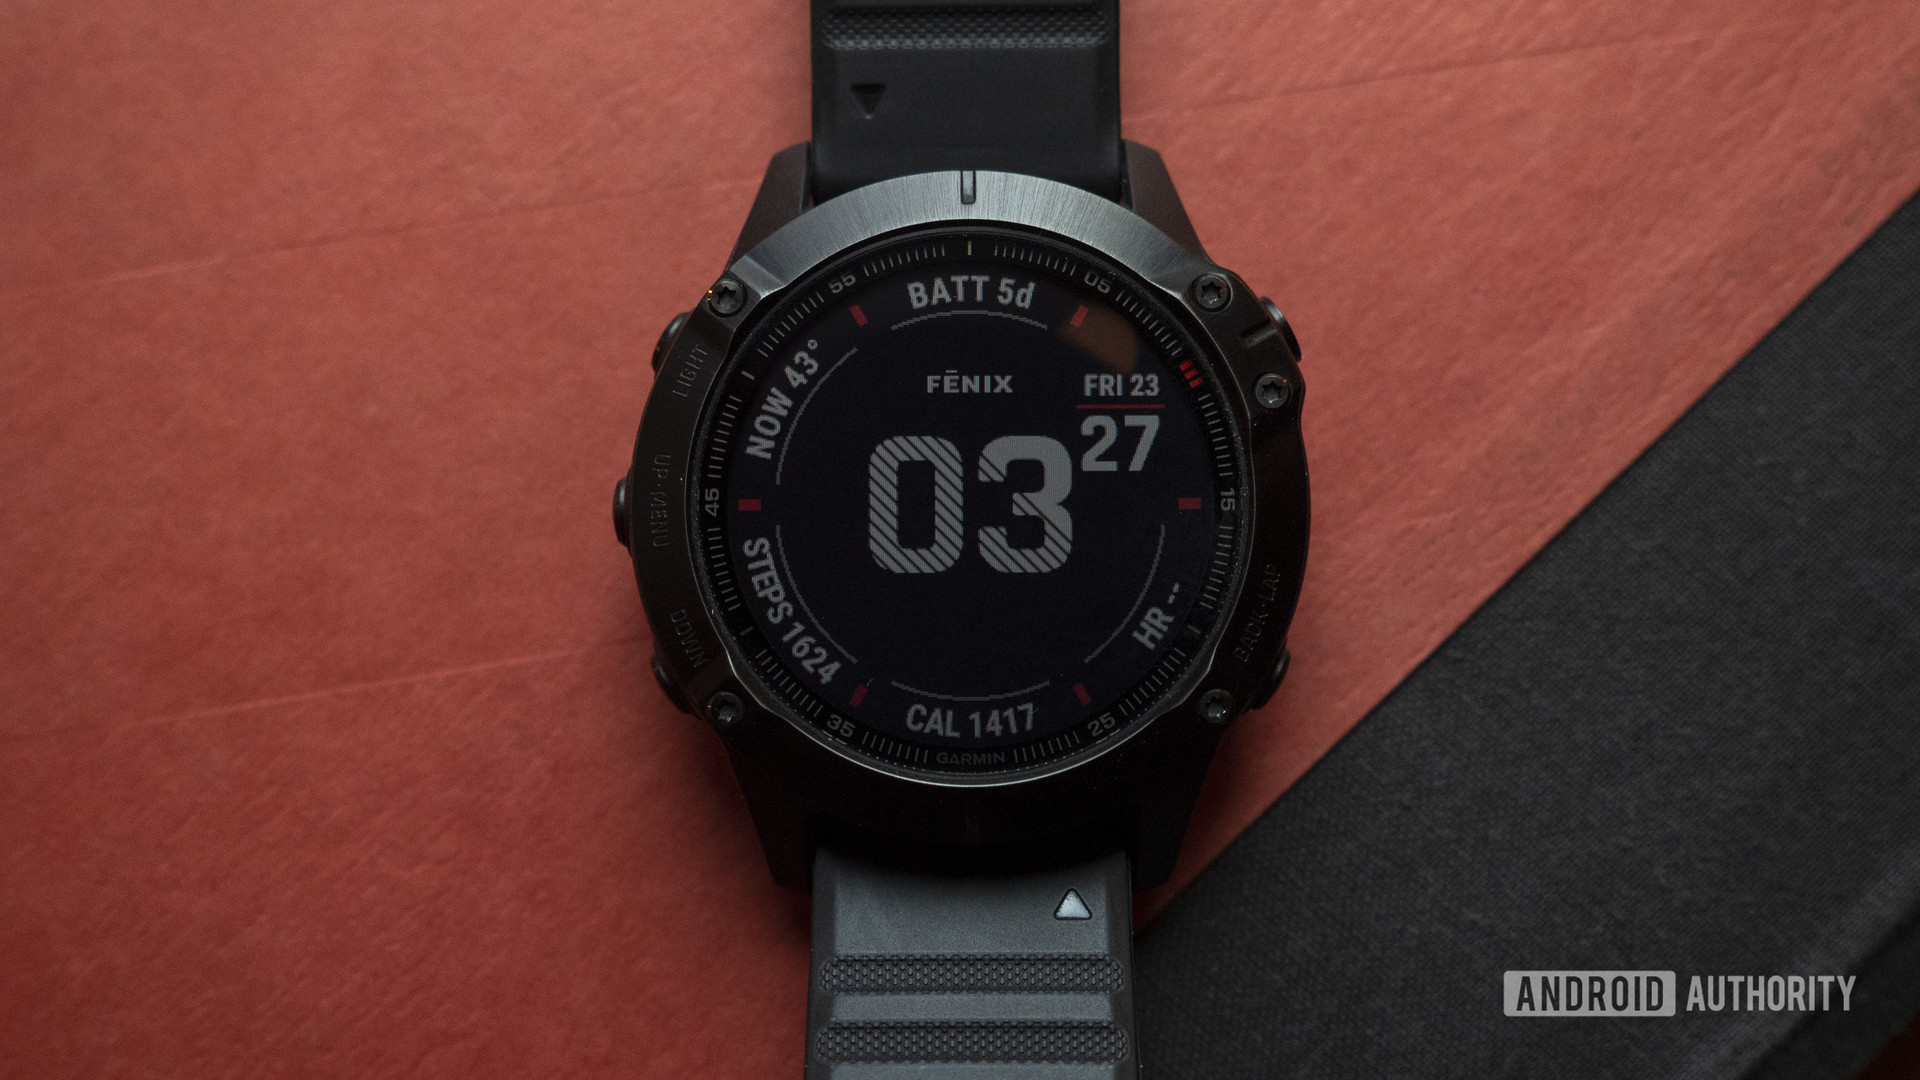 A Garmin Fenix 6 Pro rests on a red and black book displaying the watch face.